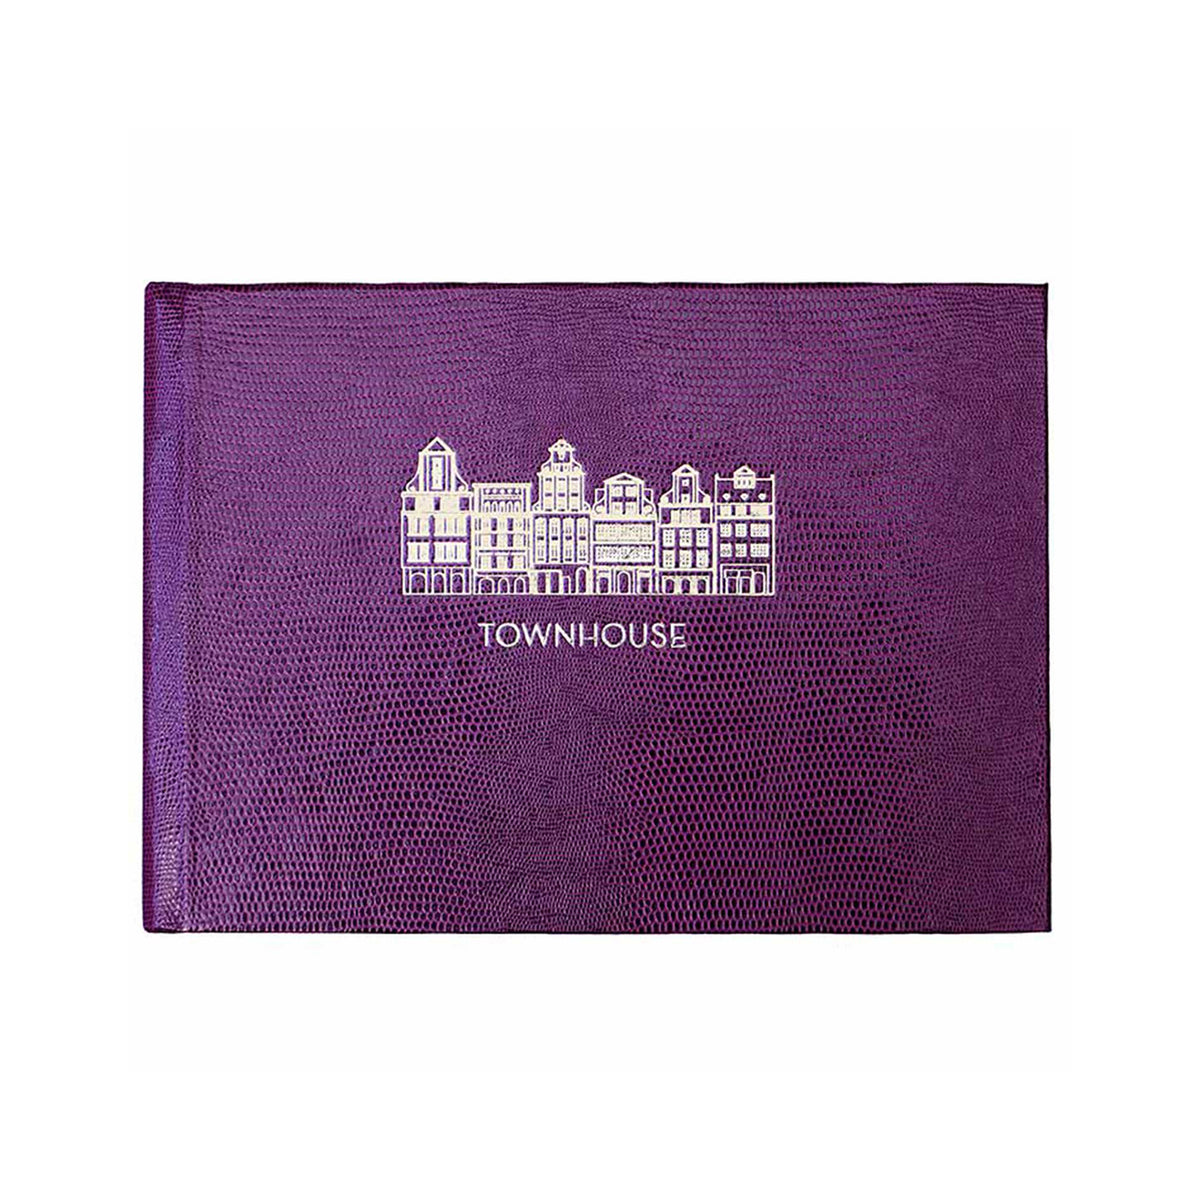 Sloane Stationery Townhouse Guest Book